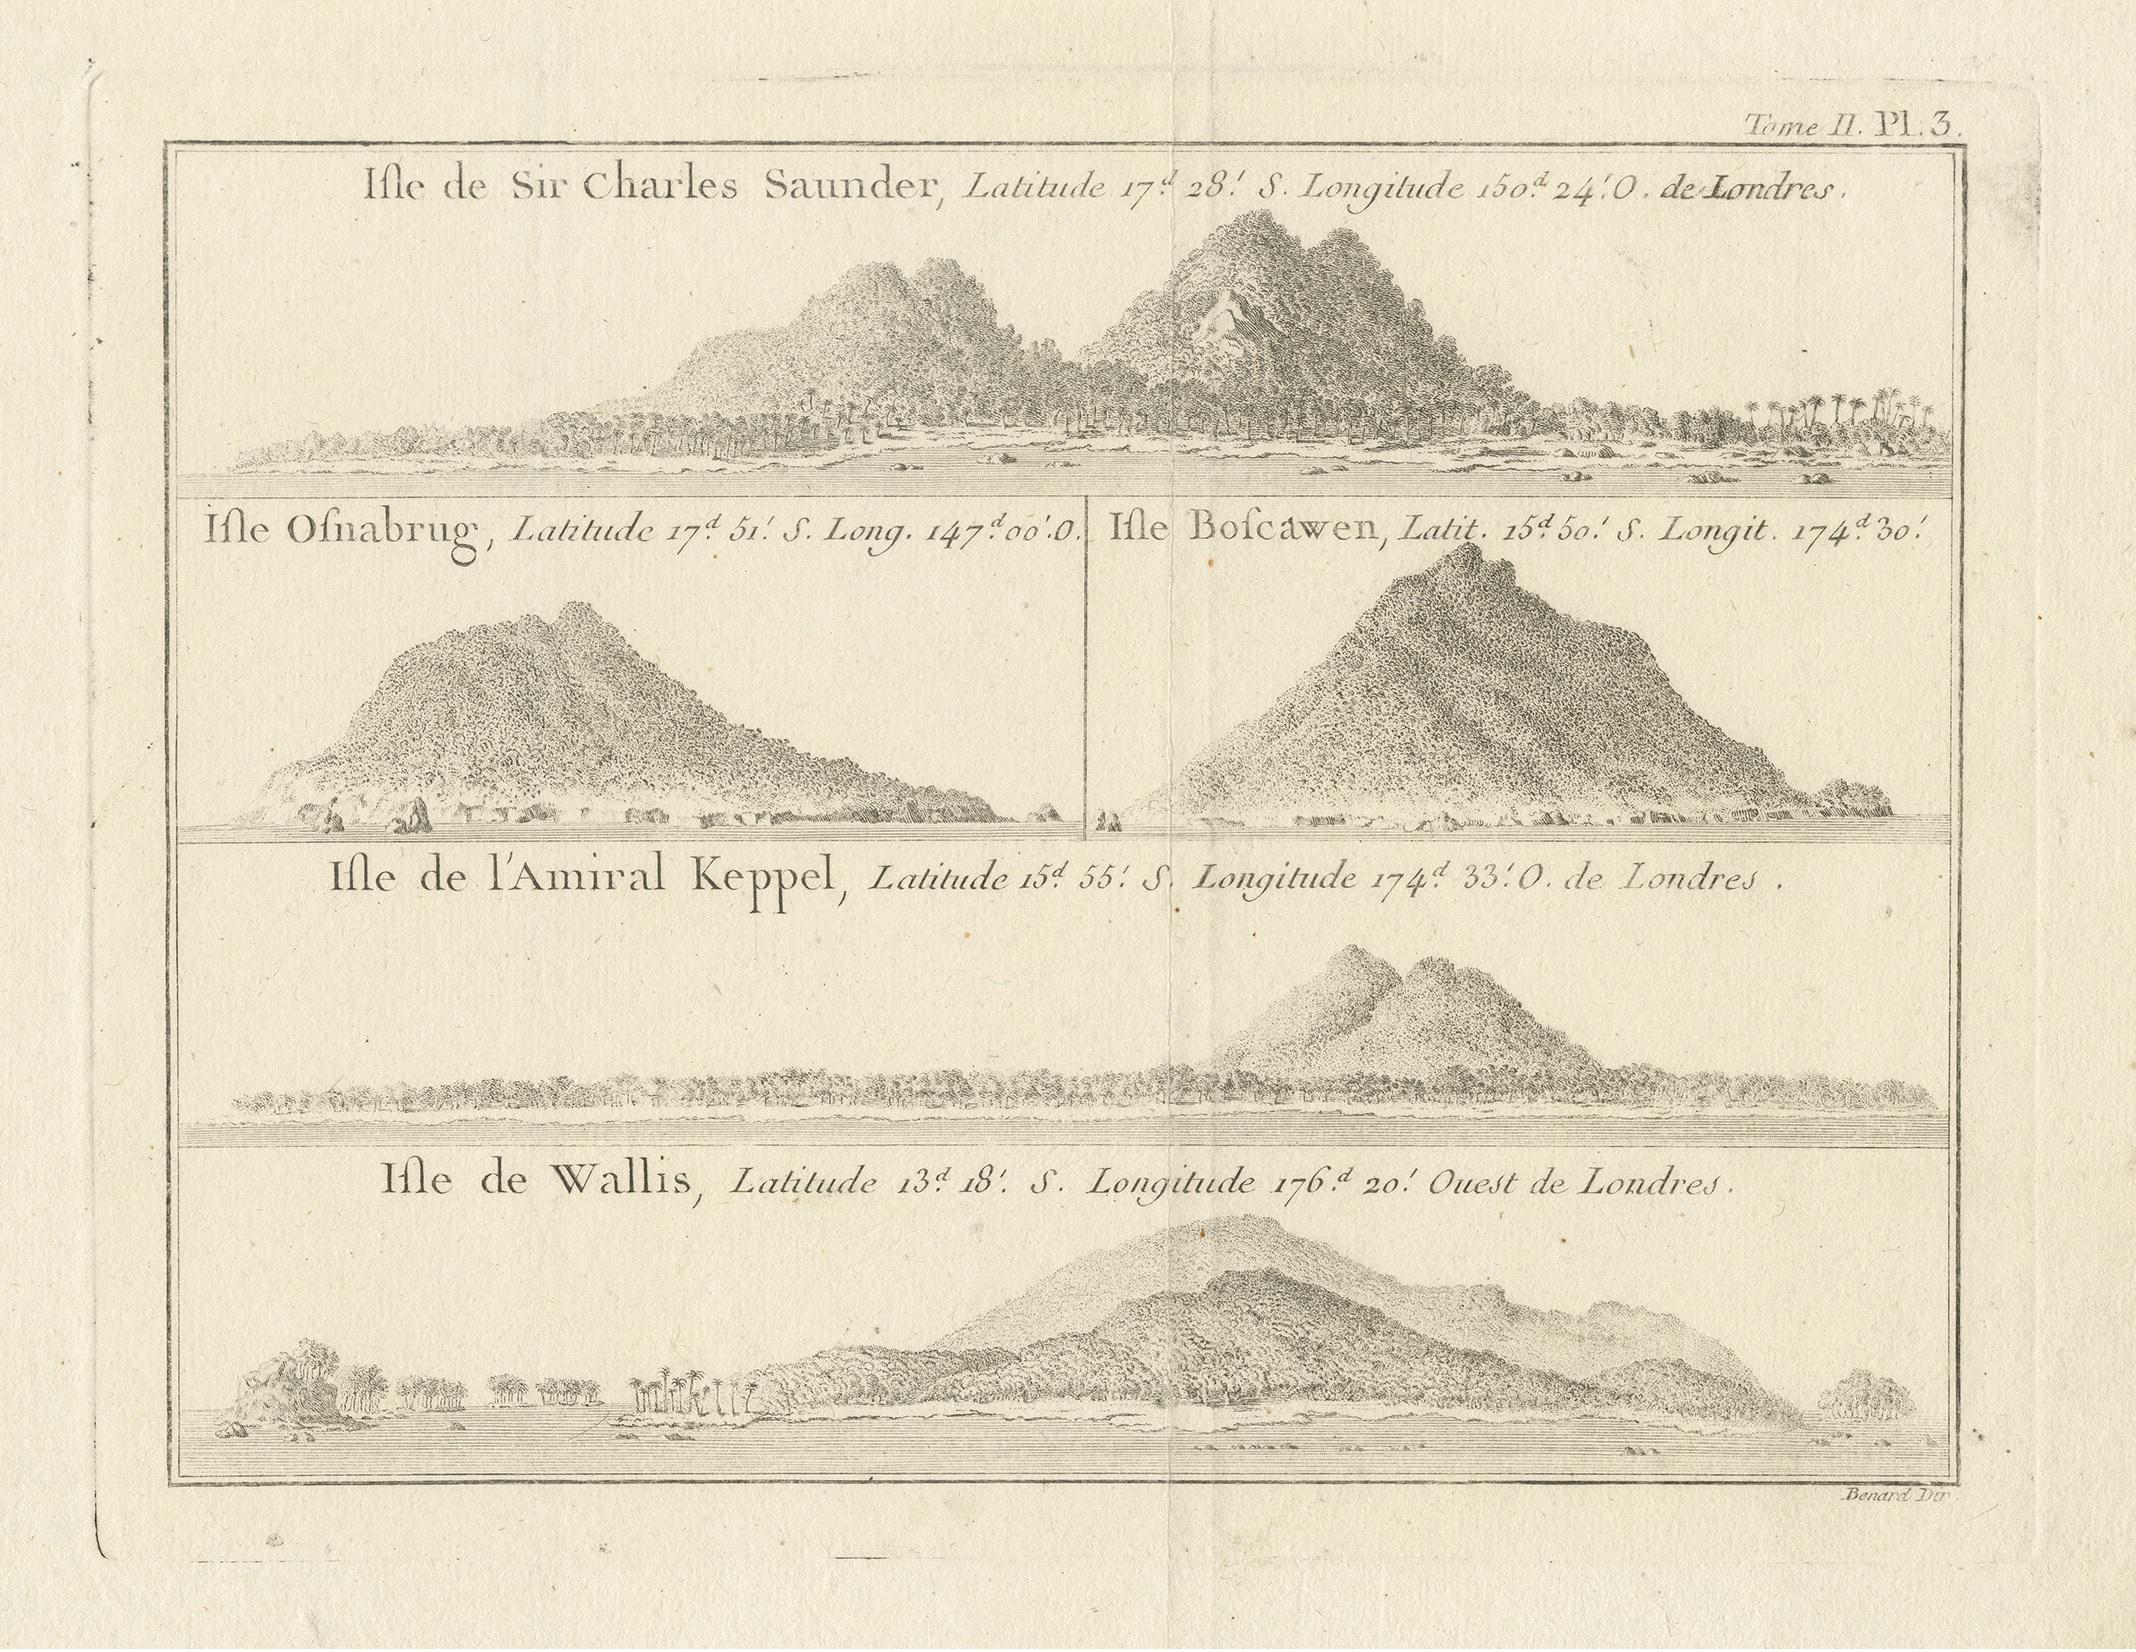 Engraved Antique Print with Views of Sir Charles Saunders Island and Other Islands, 1774 For Sale